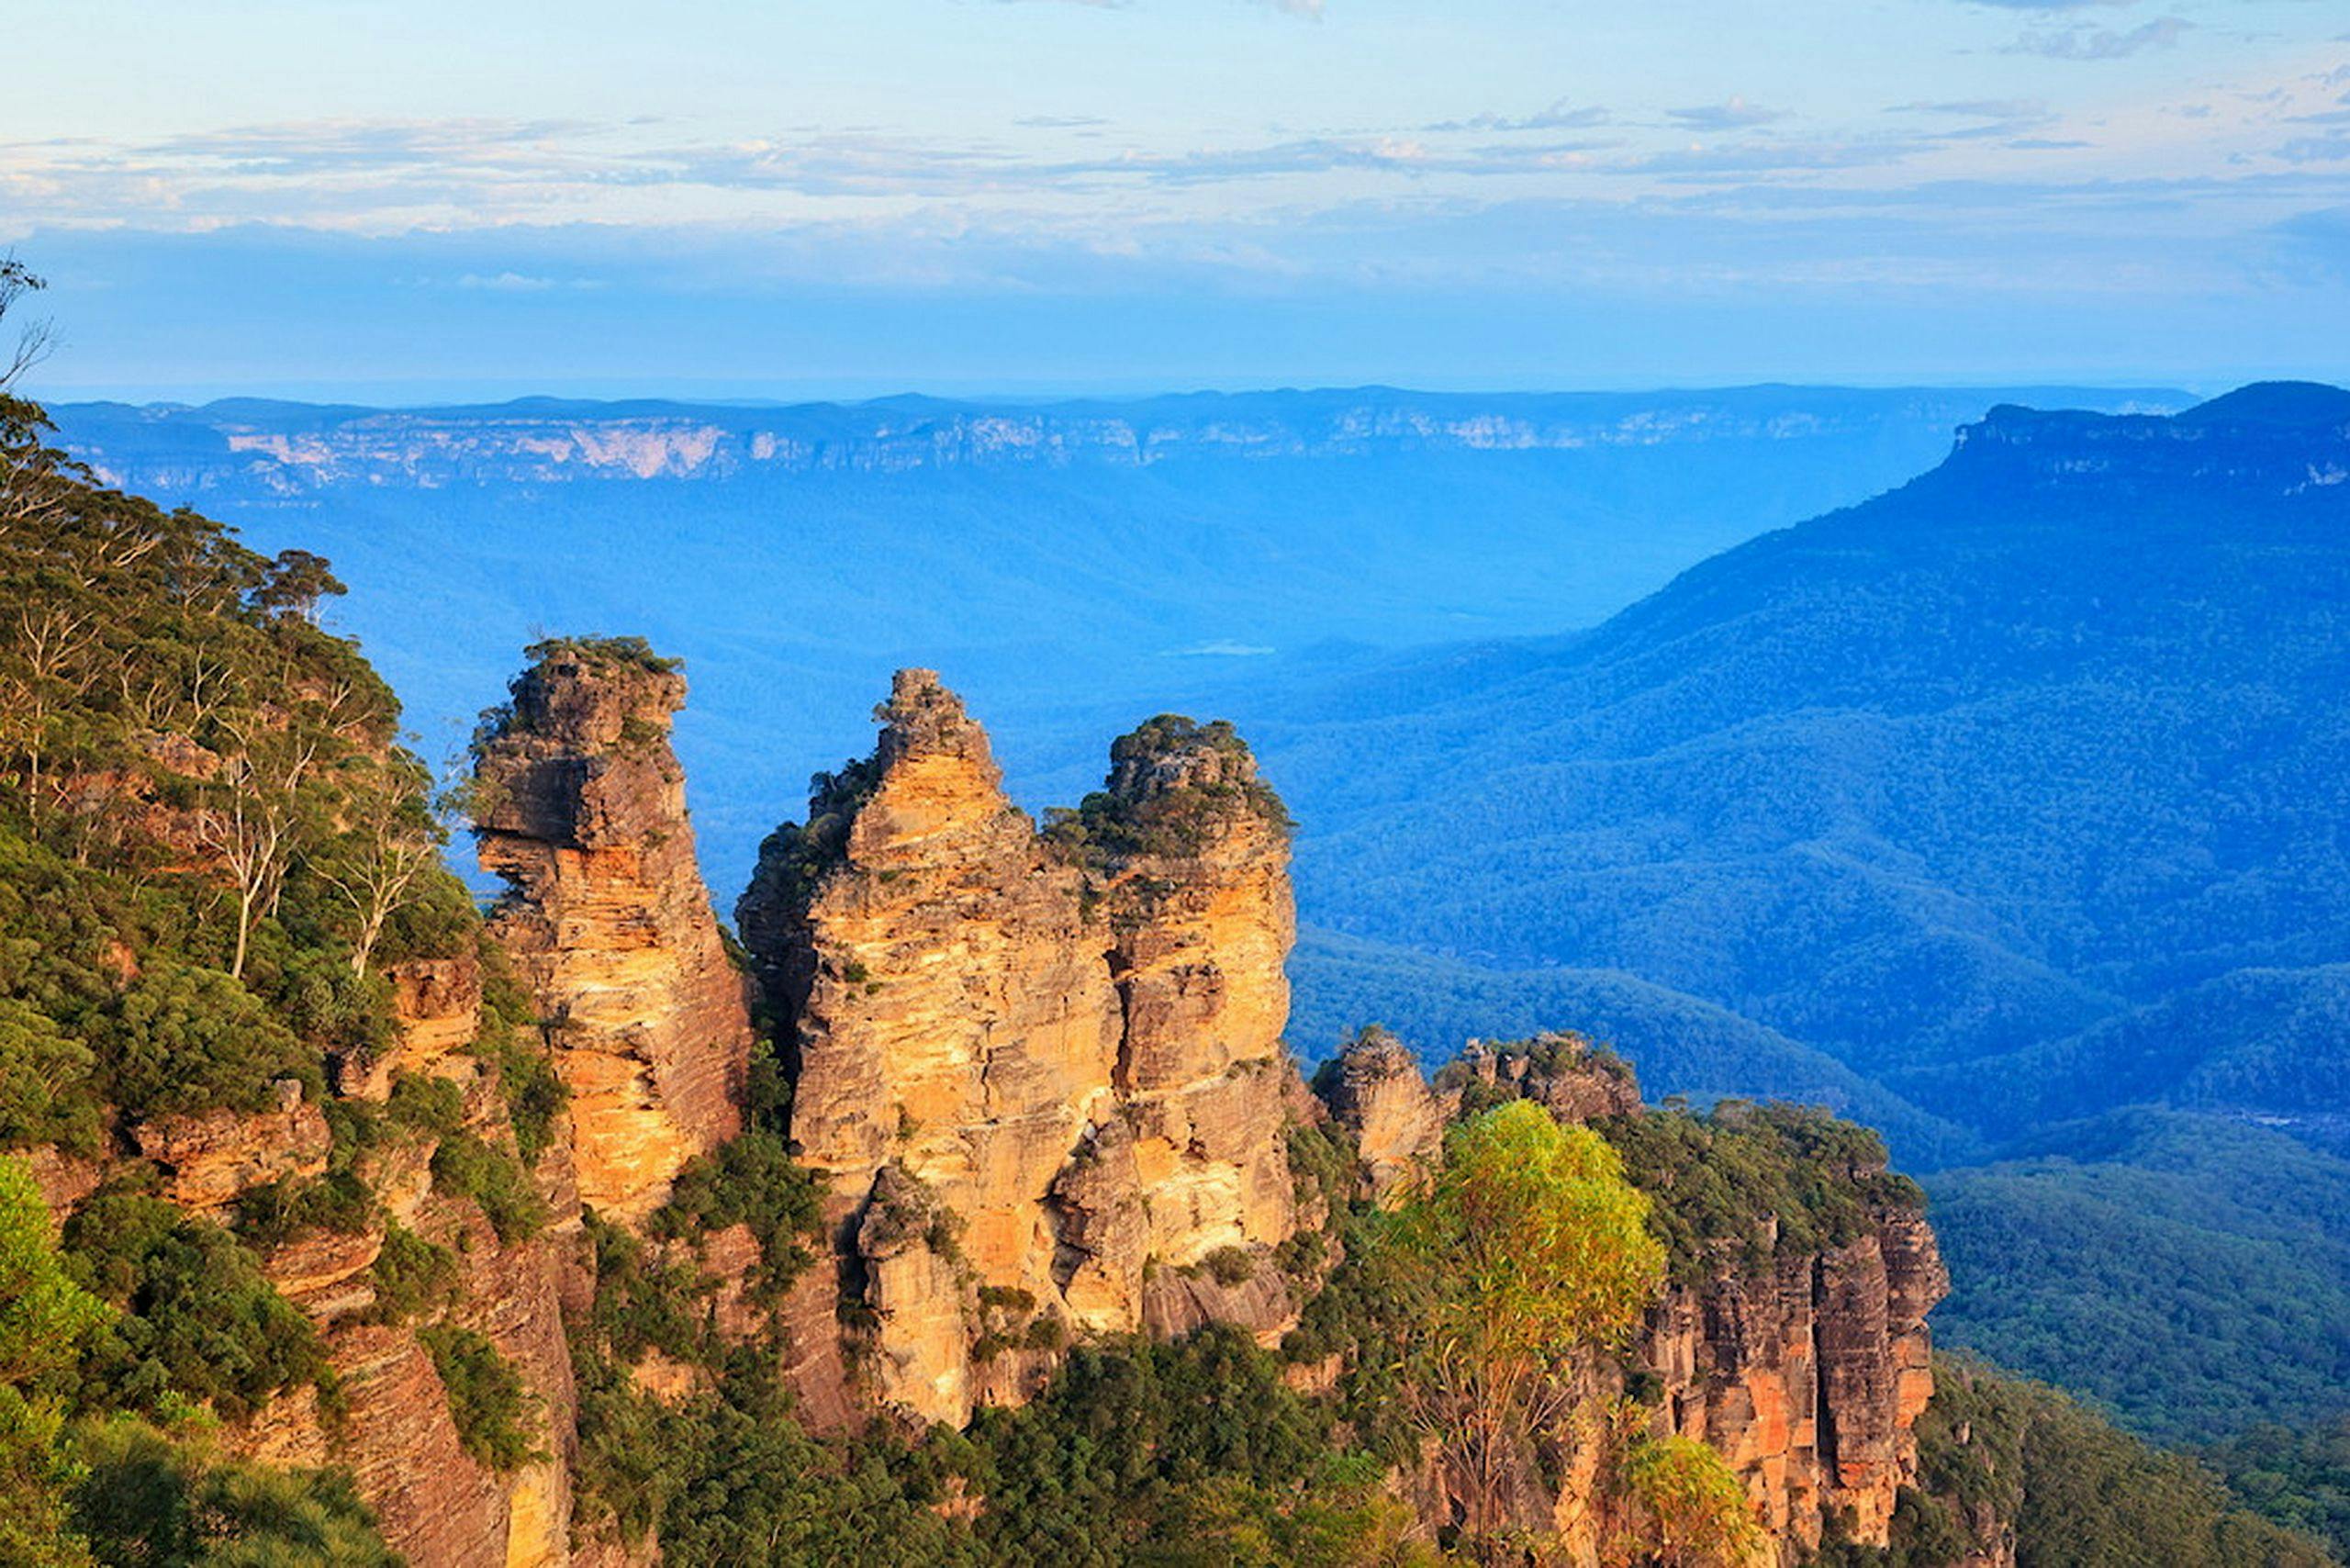 Sydney Wilderness Tours trading as Blue Mountains Day Tours